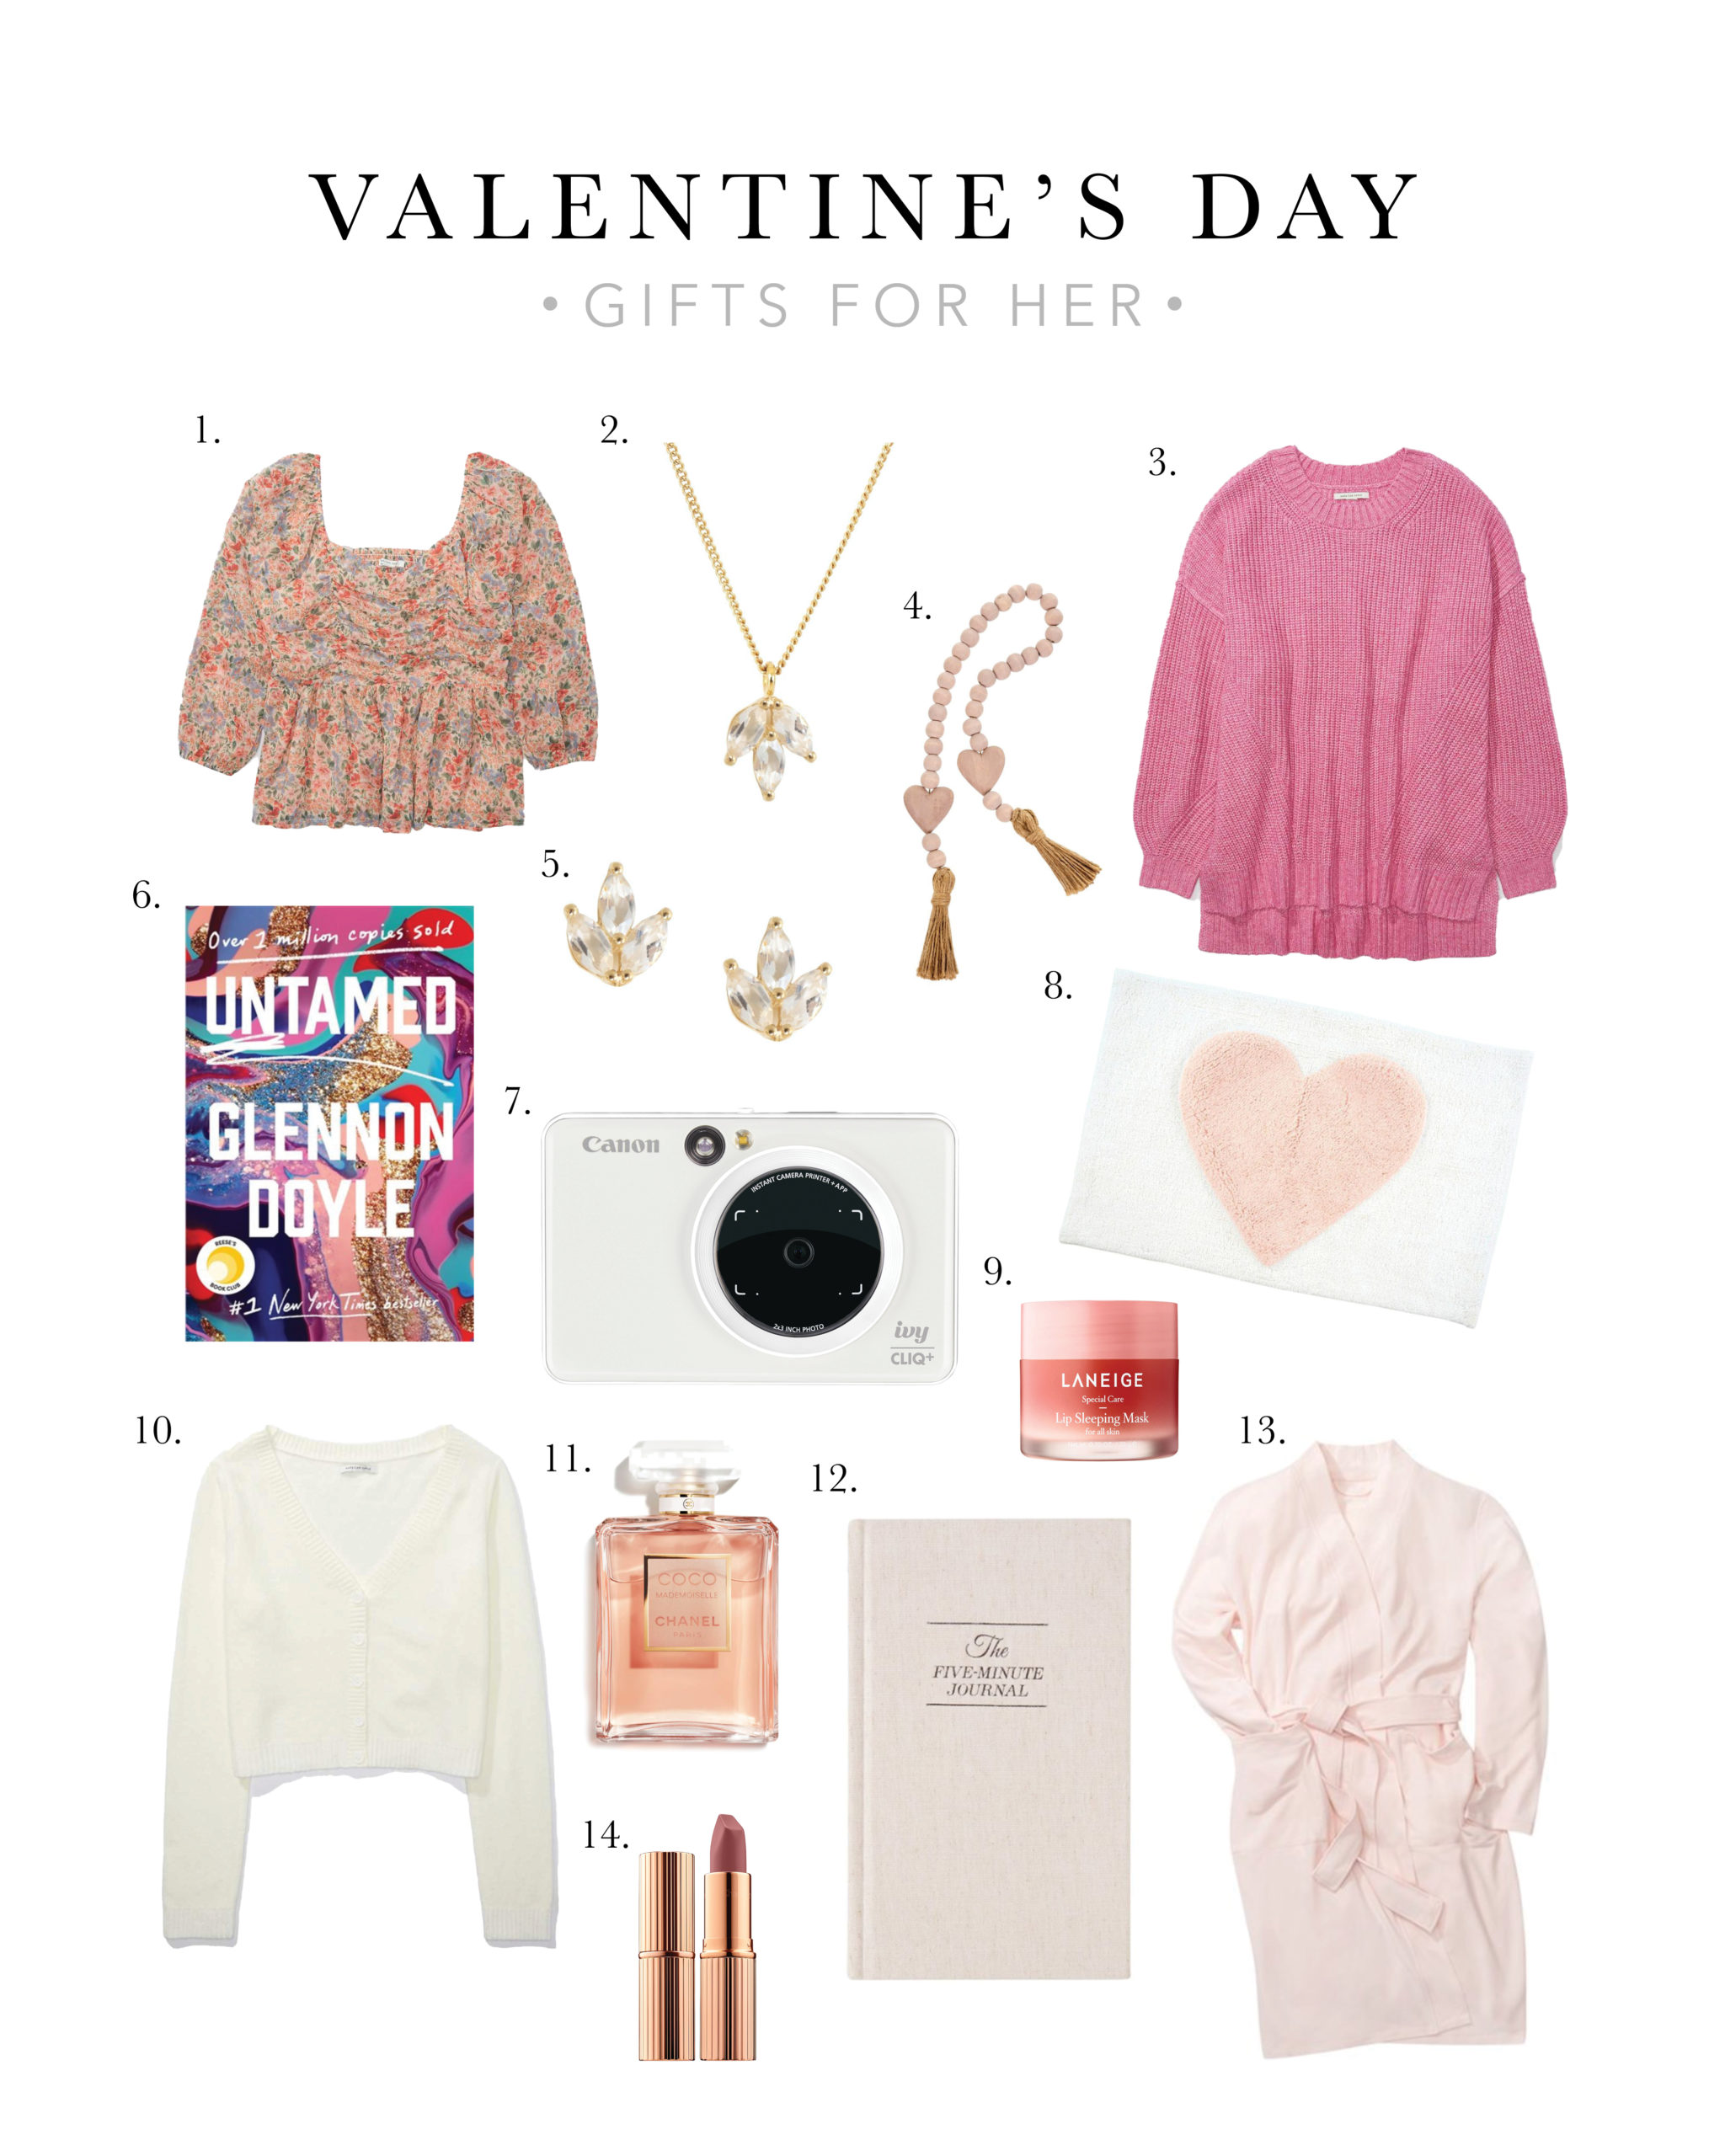 Valentine's Day gift ideas for her